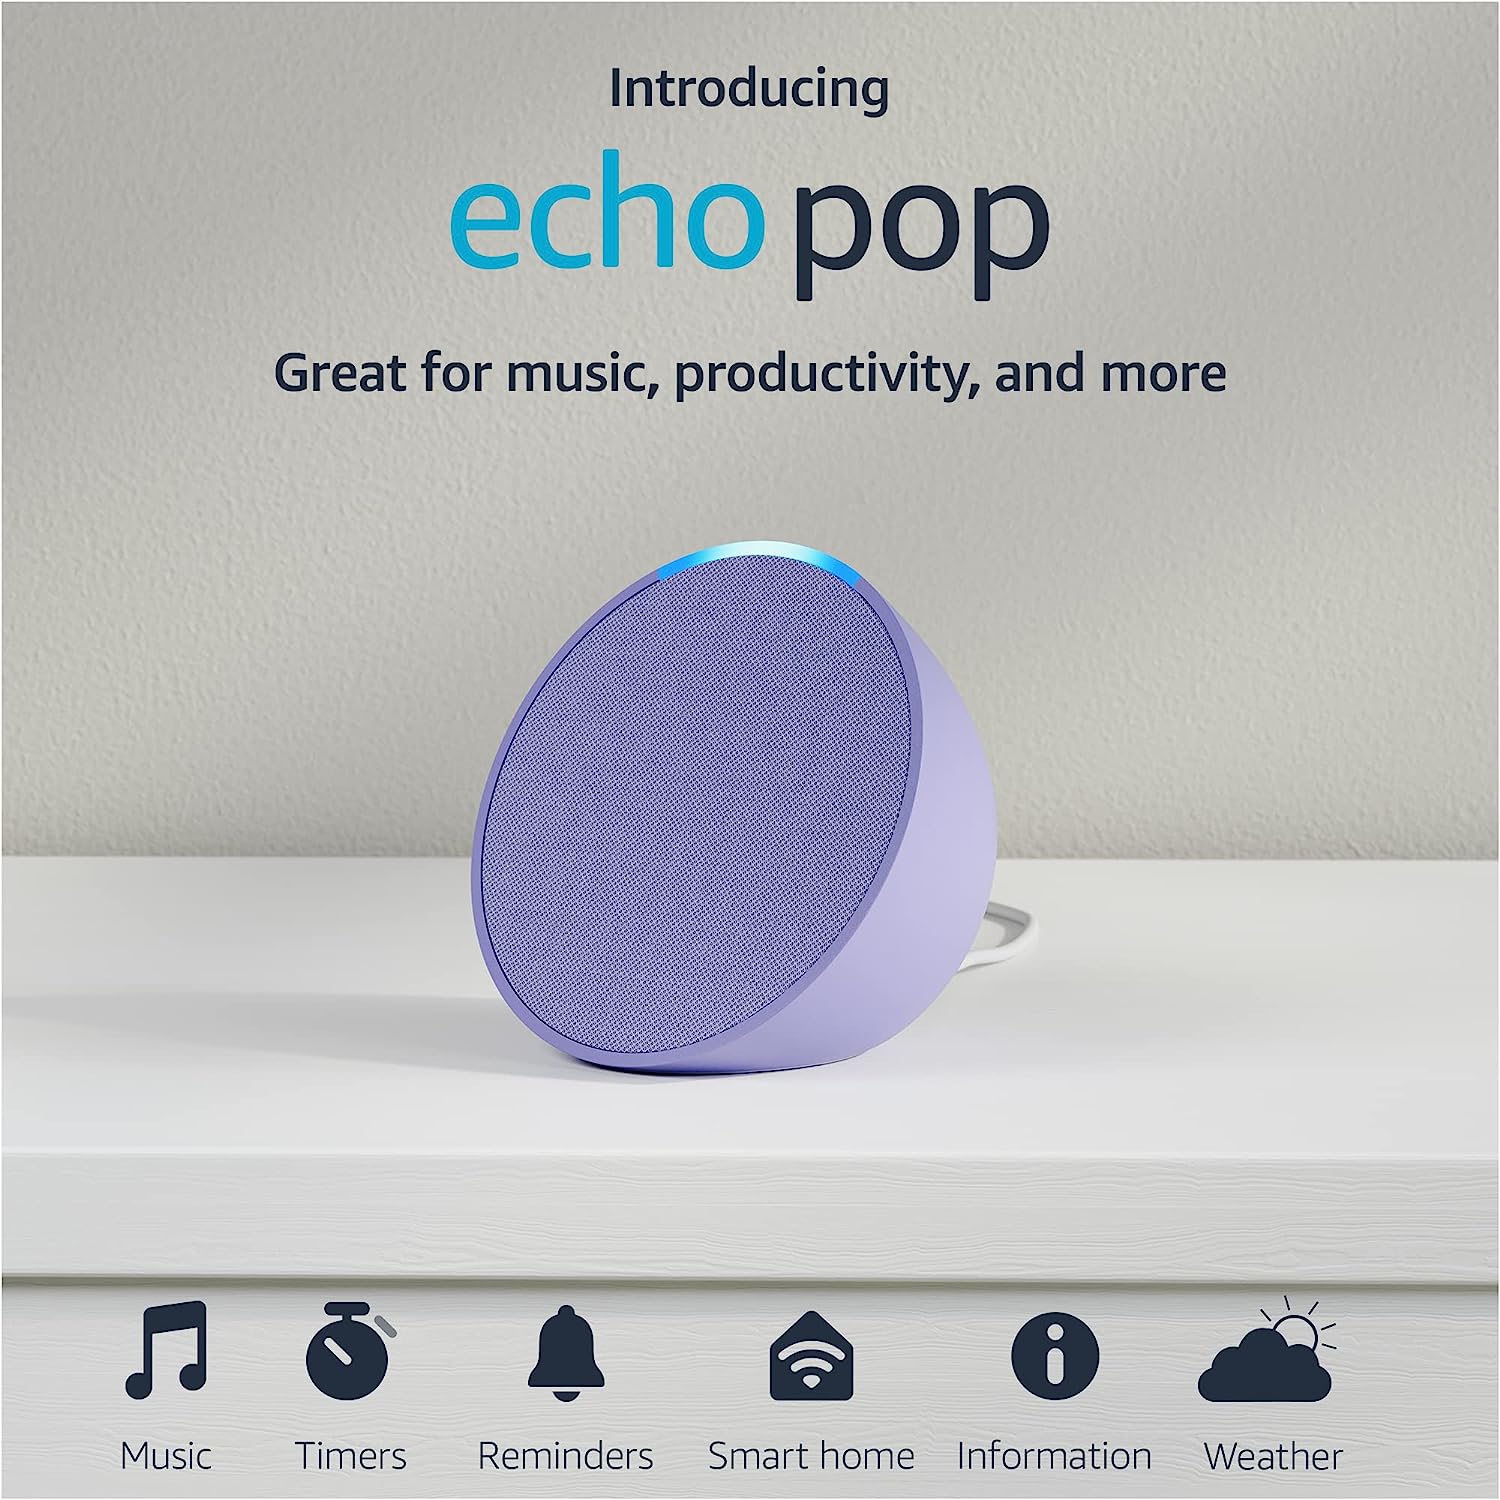 Echo Pop Full sound compact smart speaker with Alexa in Charcoal